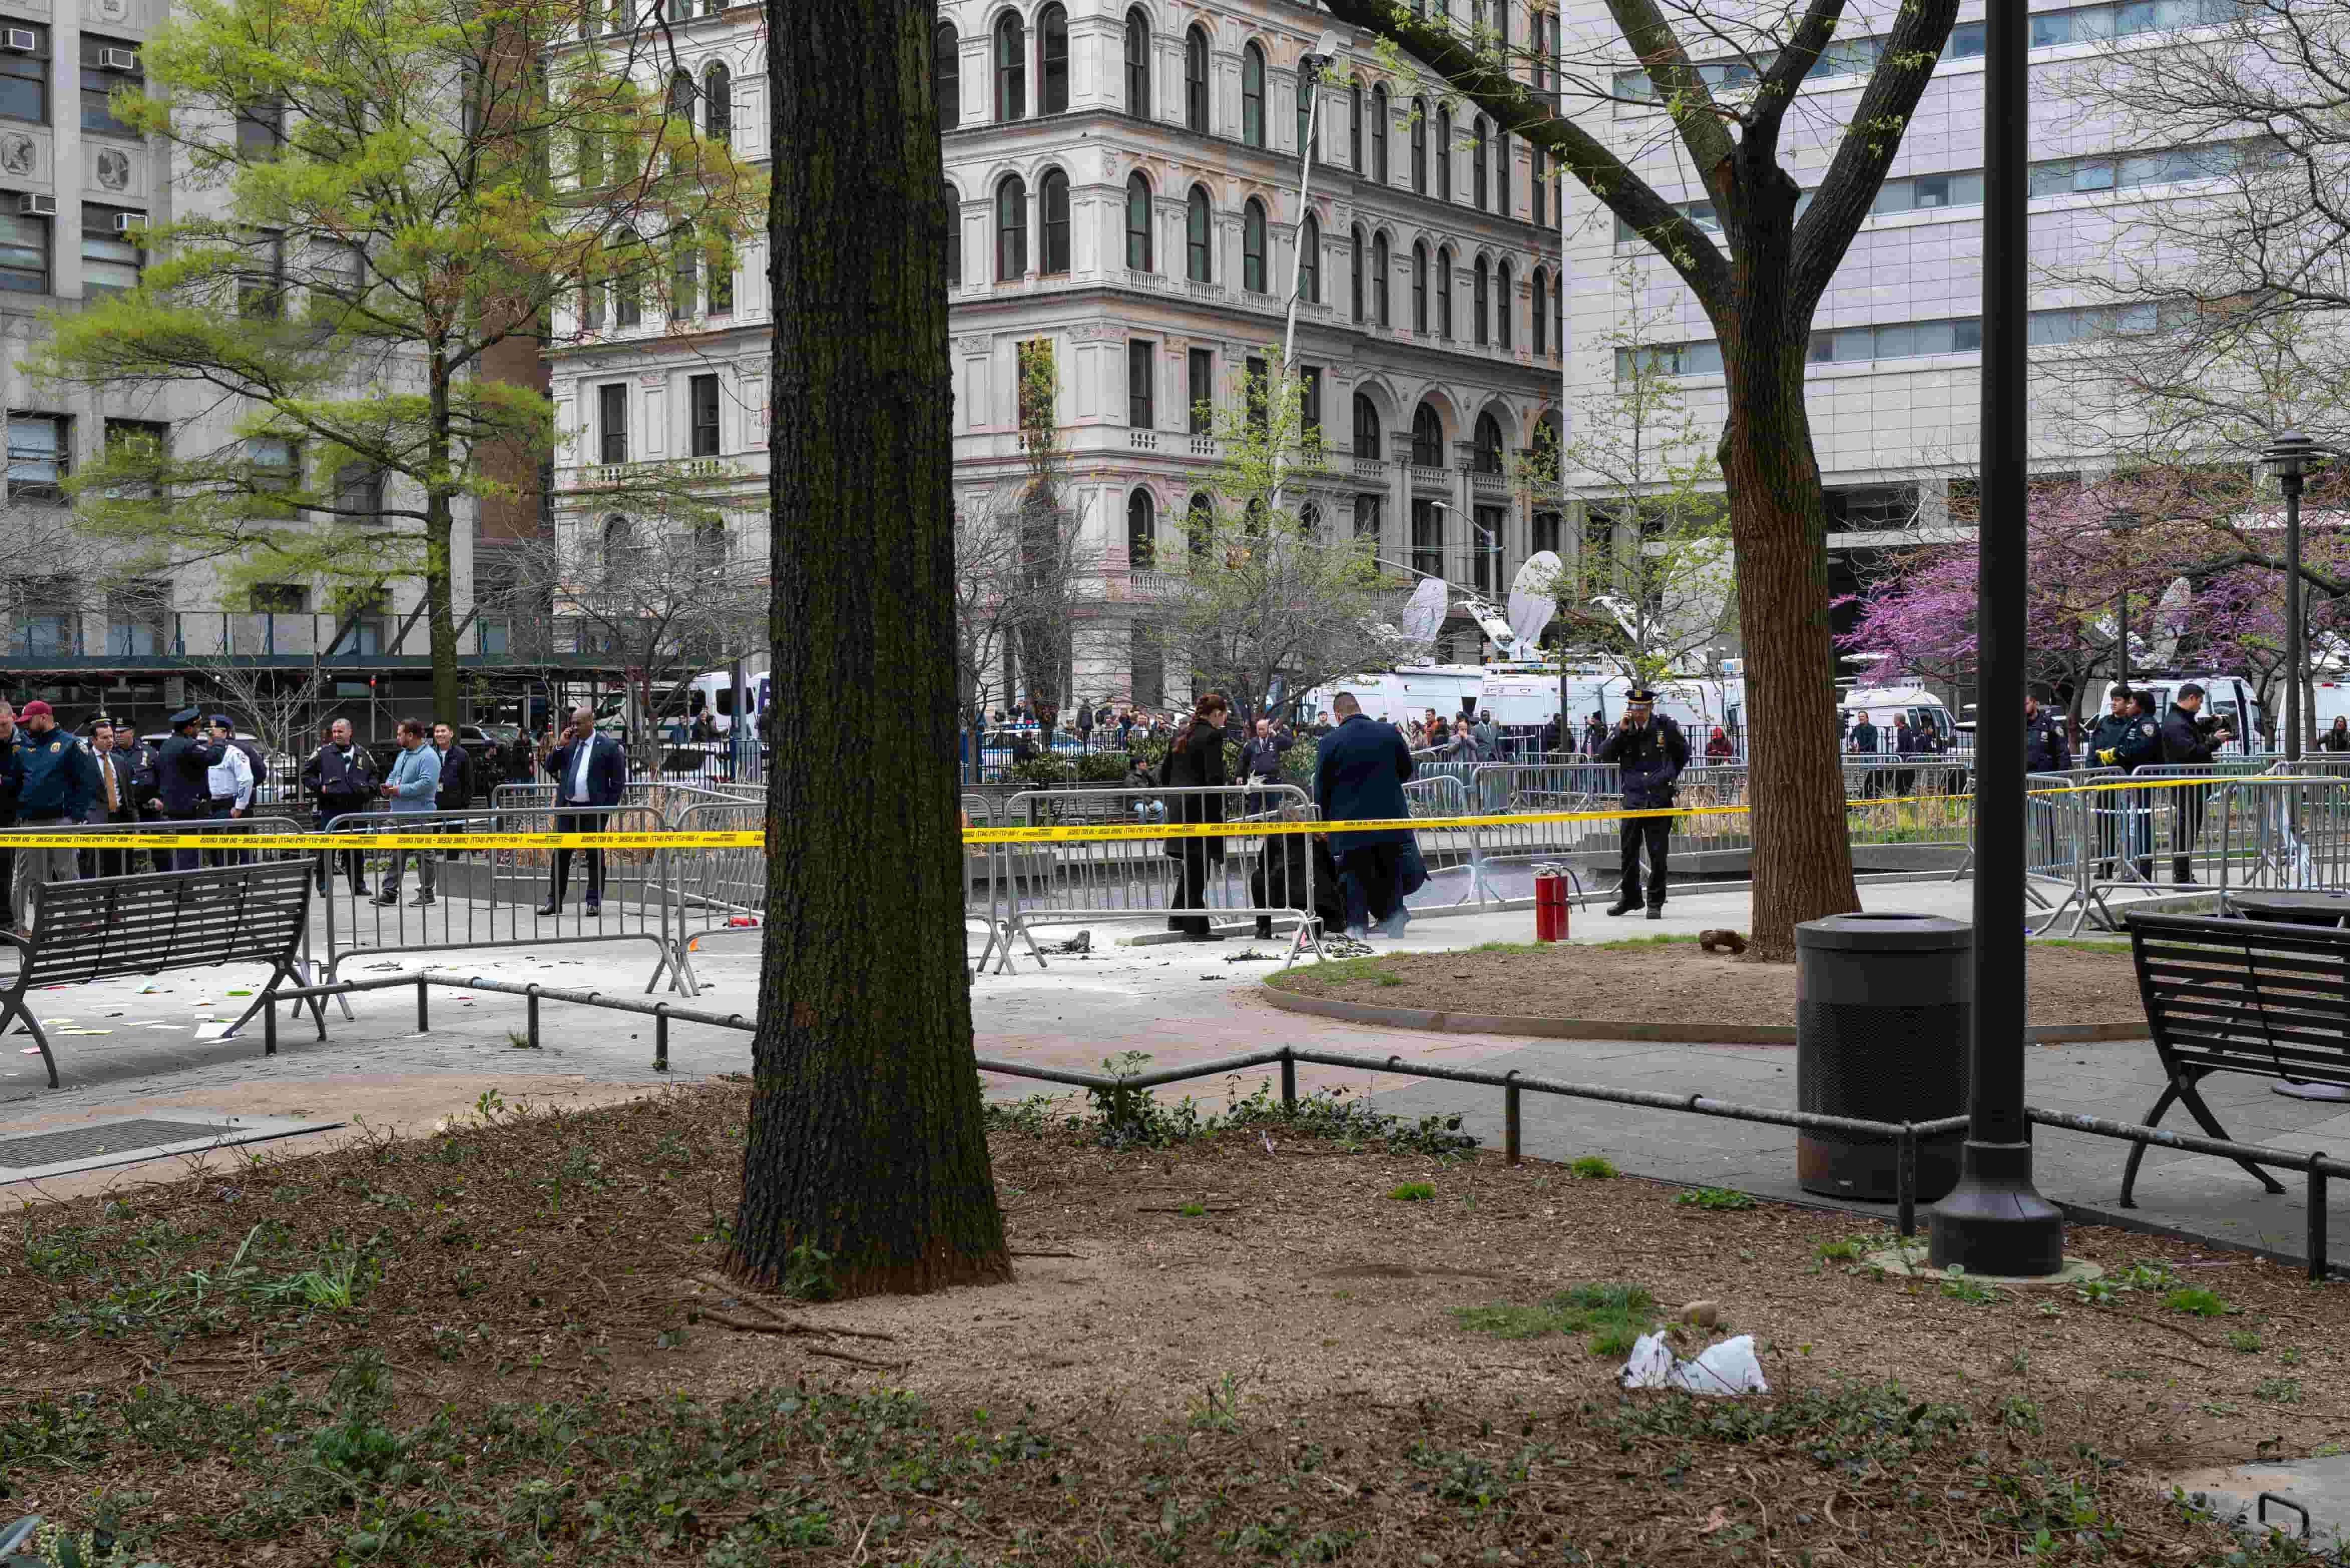 Man Who Self-Immolated Outside Trump Trial Dies